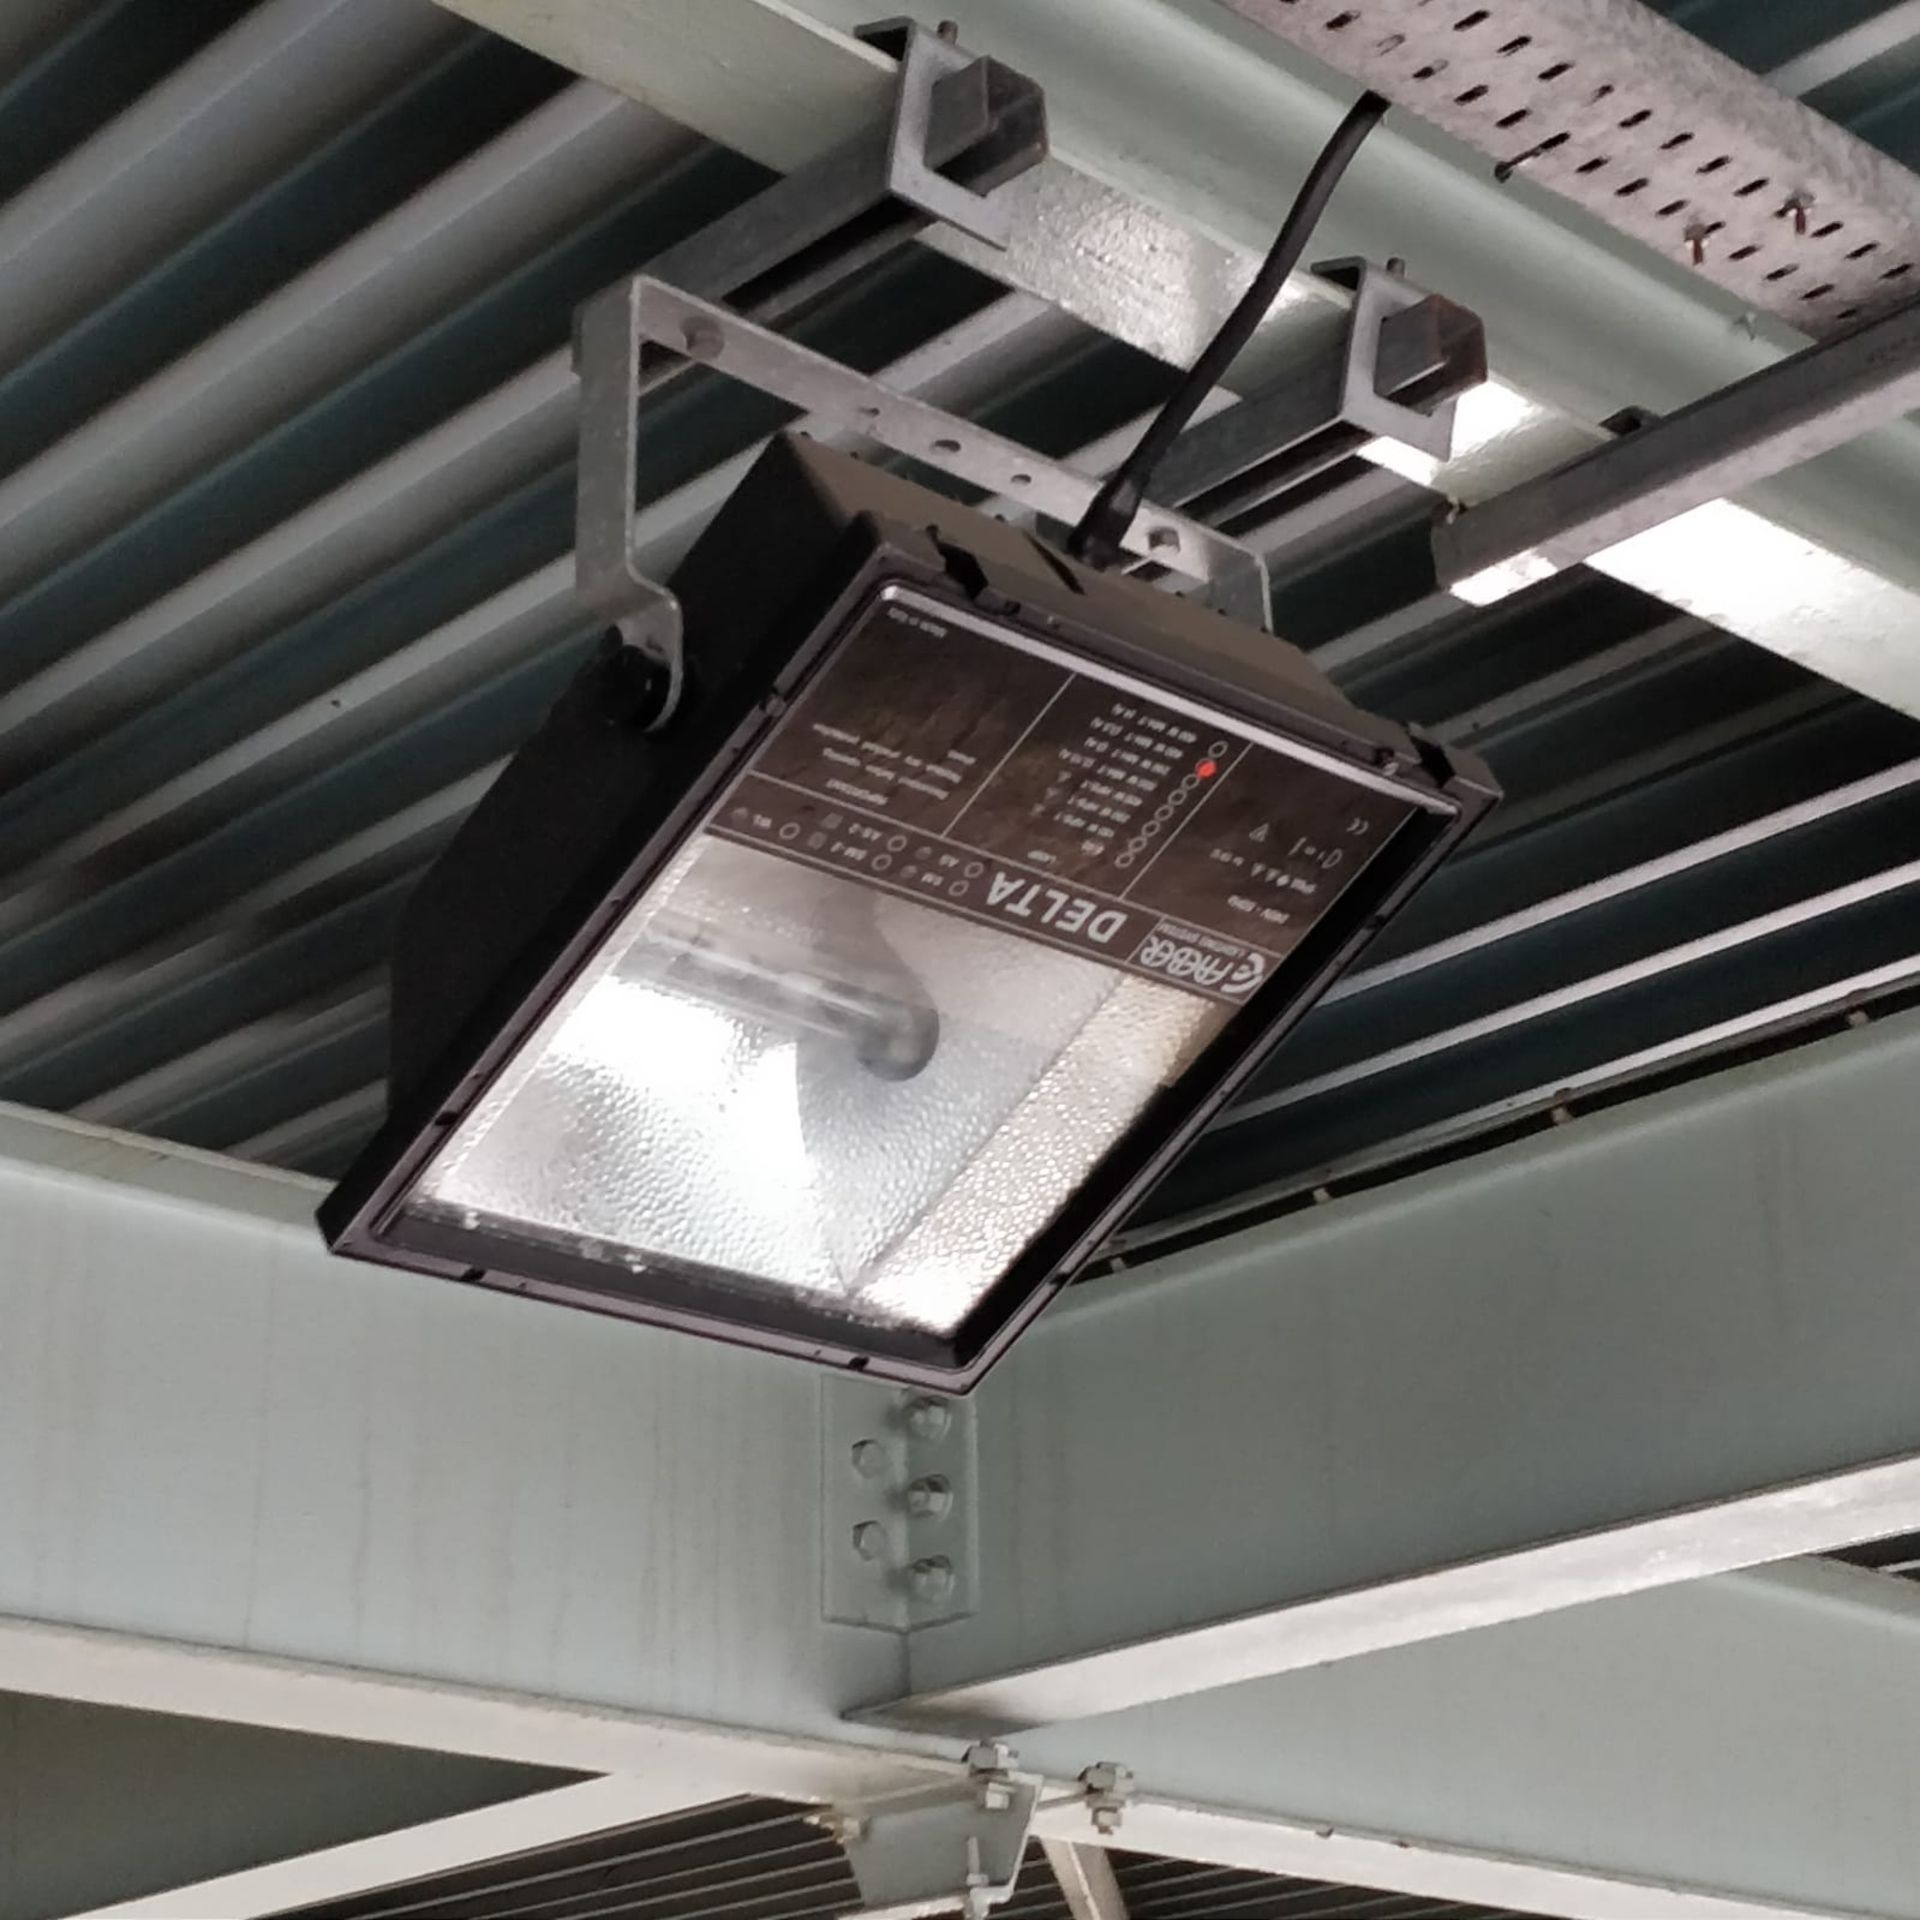 3 x Flood Lights Including 1 x Zeta 70 and 2 x Delta - Ref EP - CL451 - Location: Scunthorpe, - Image 2 of 3